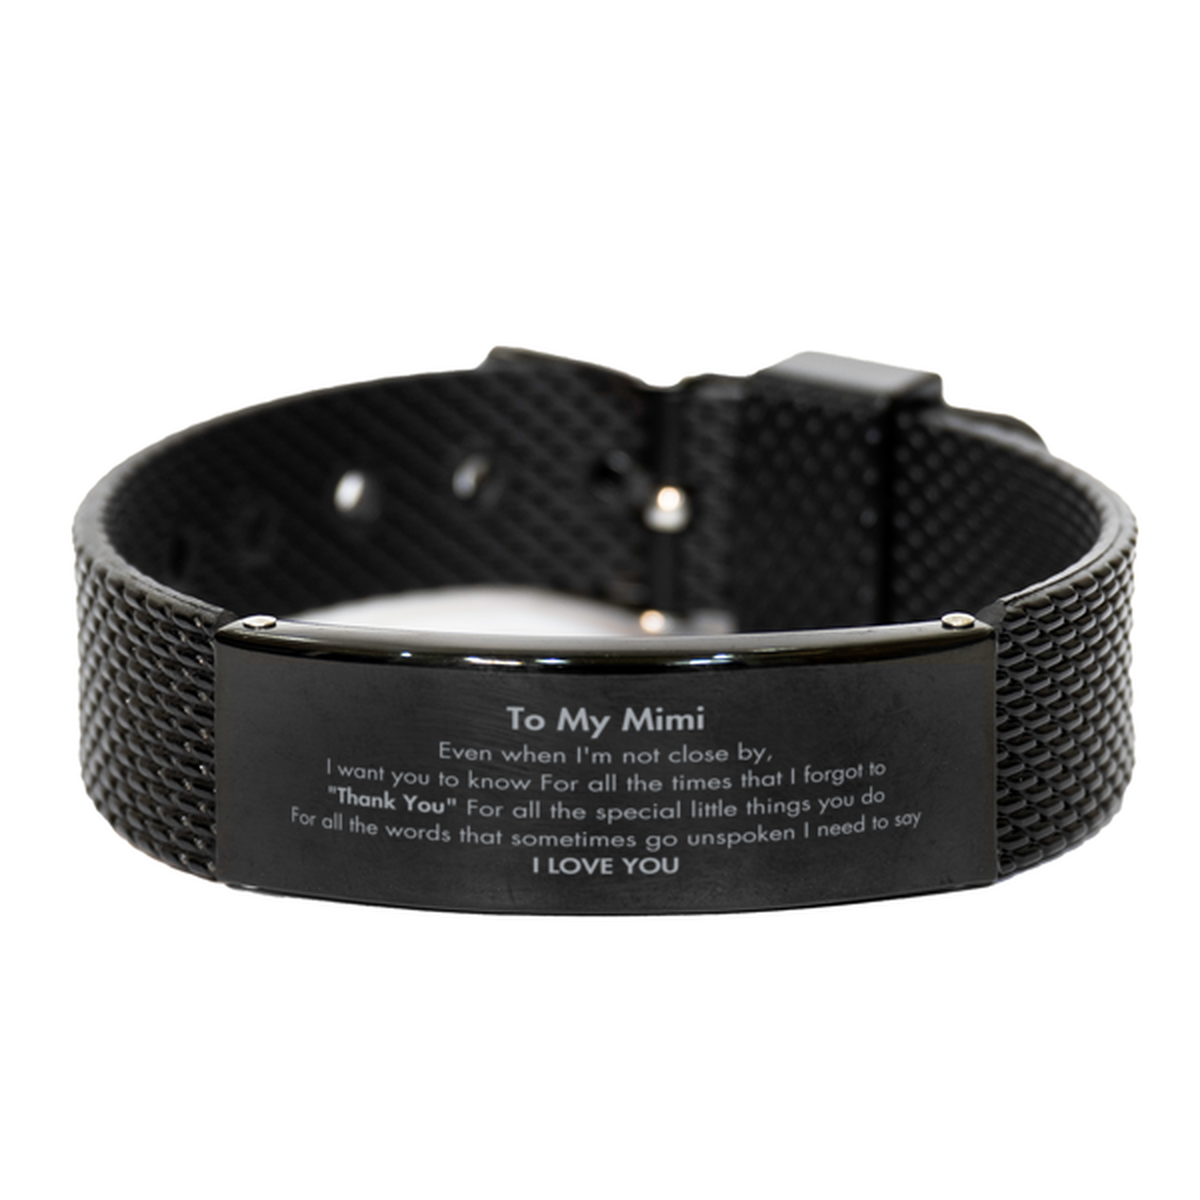 Thank You Gifts for Mimi, Keepsake Black Shark Mesh Bracelet Gifts for Mimi Birthday Mother's day Father's Day Mimi For all the words That sometimes go unspoken I need to say I LOVE YOU